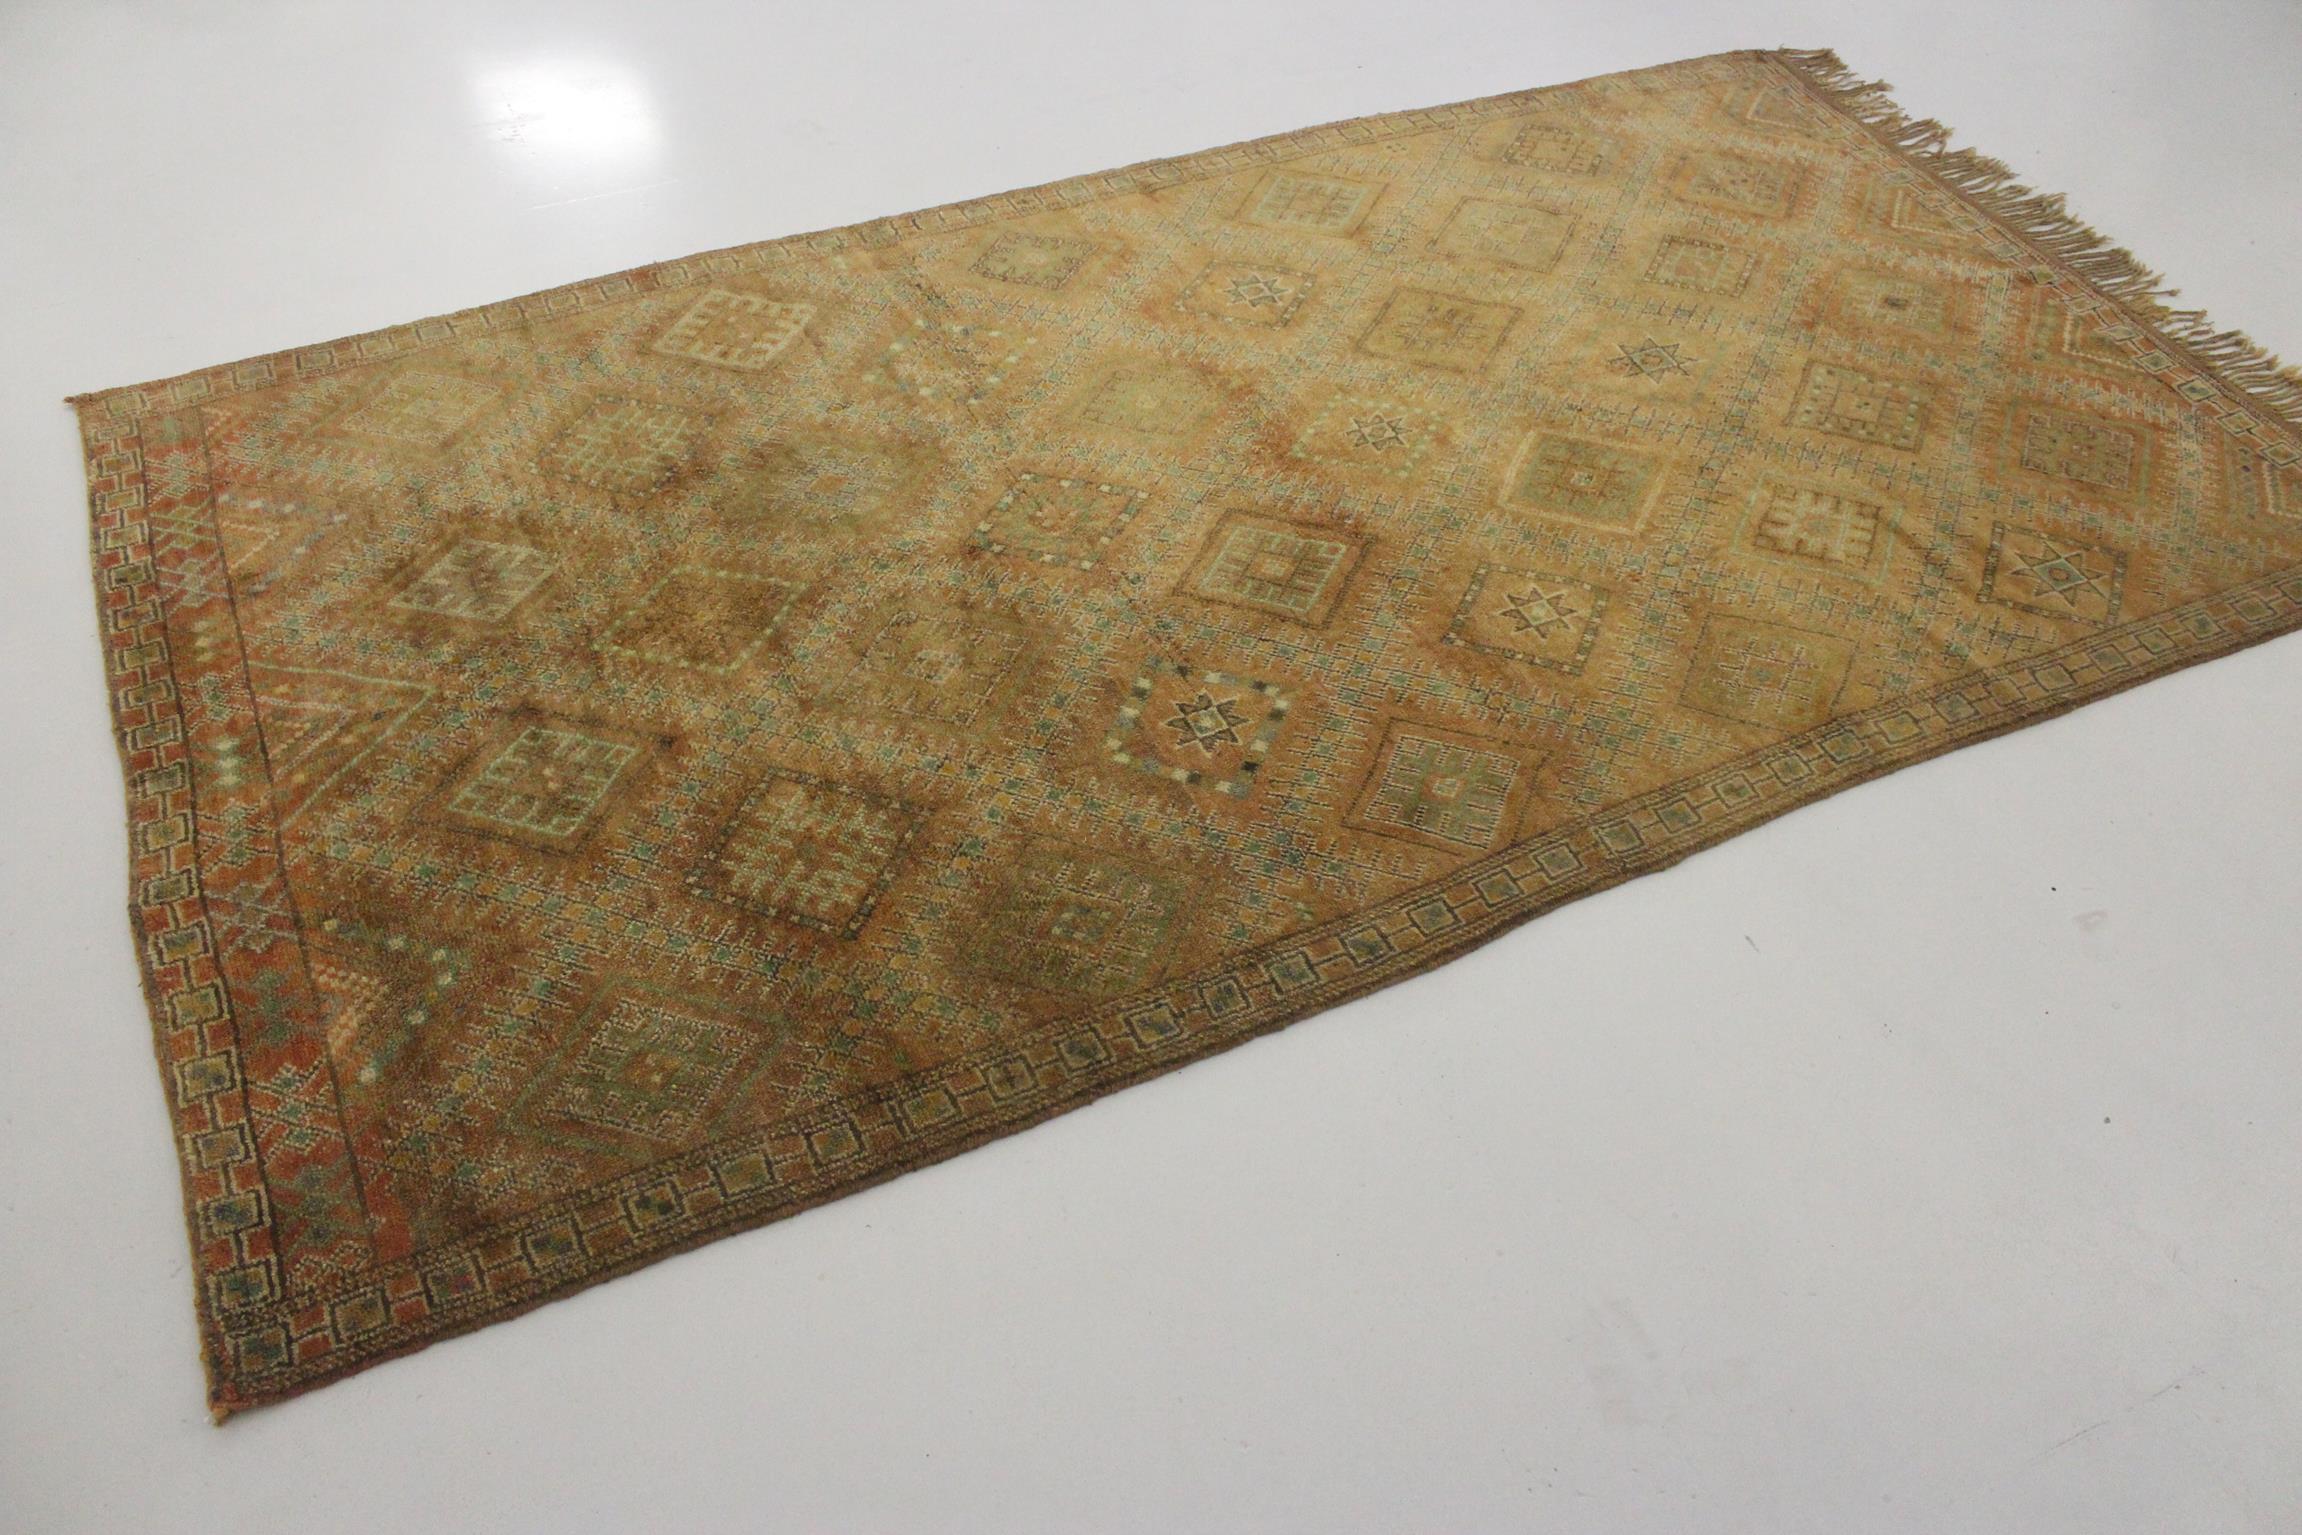 Vintage Moroccan Zemmour rug - Ochre - 6x11.3feet / 185x345cm In Good Condition For Sale In Marrakech, MA